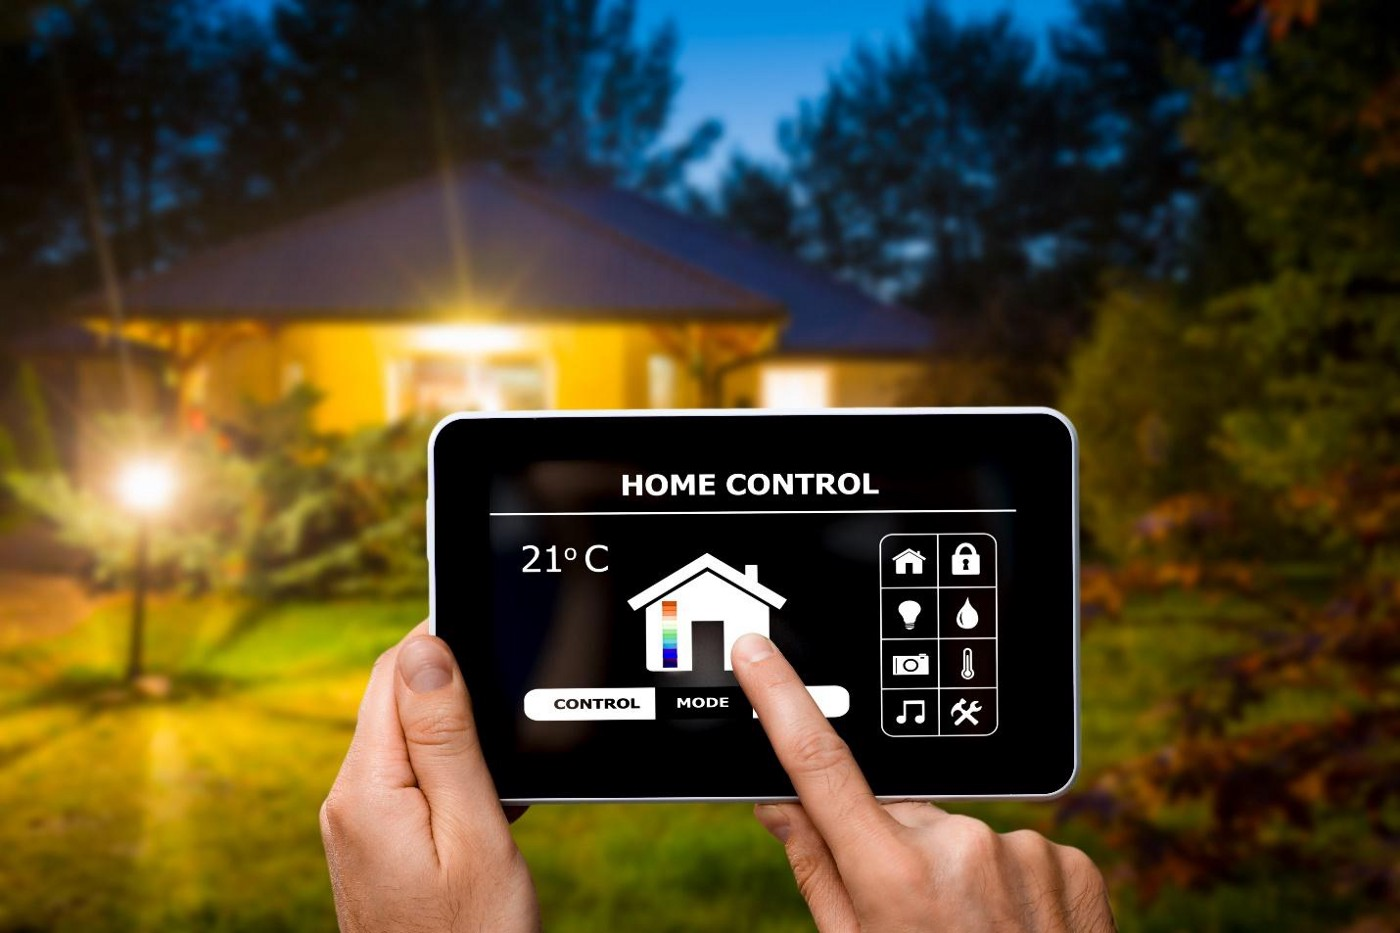 How to save money with a smart home system?